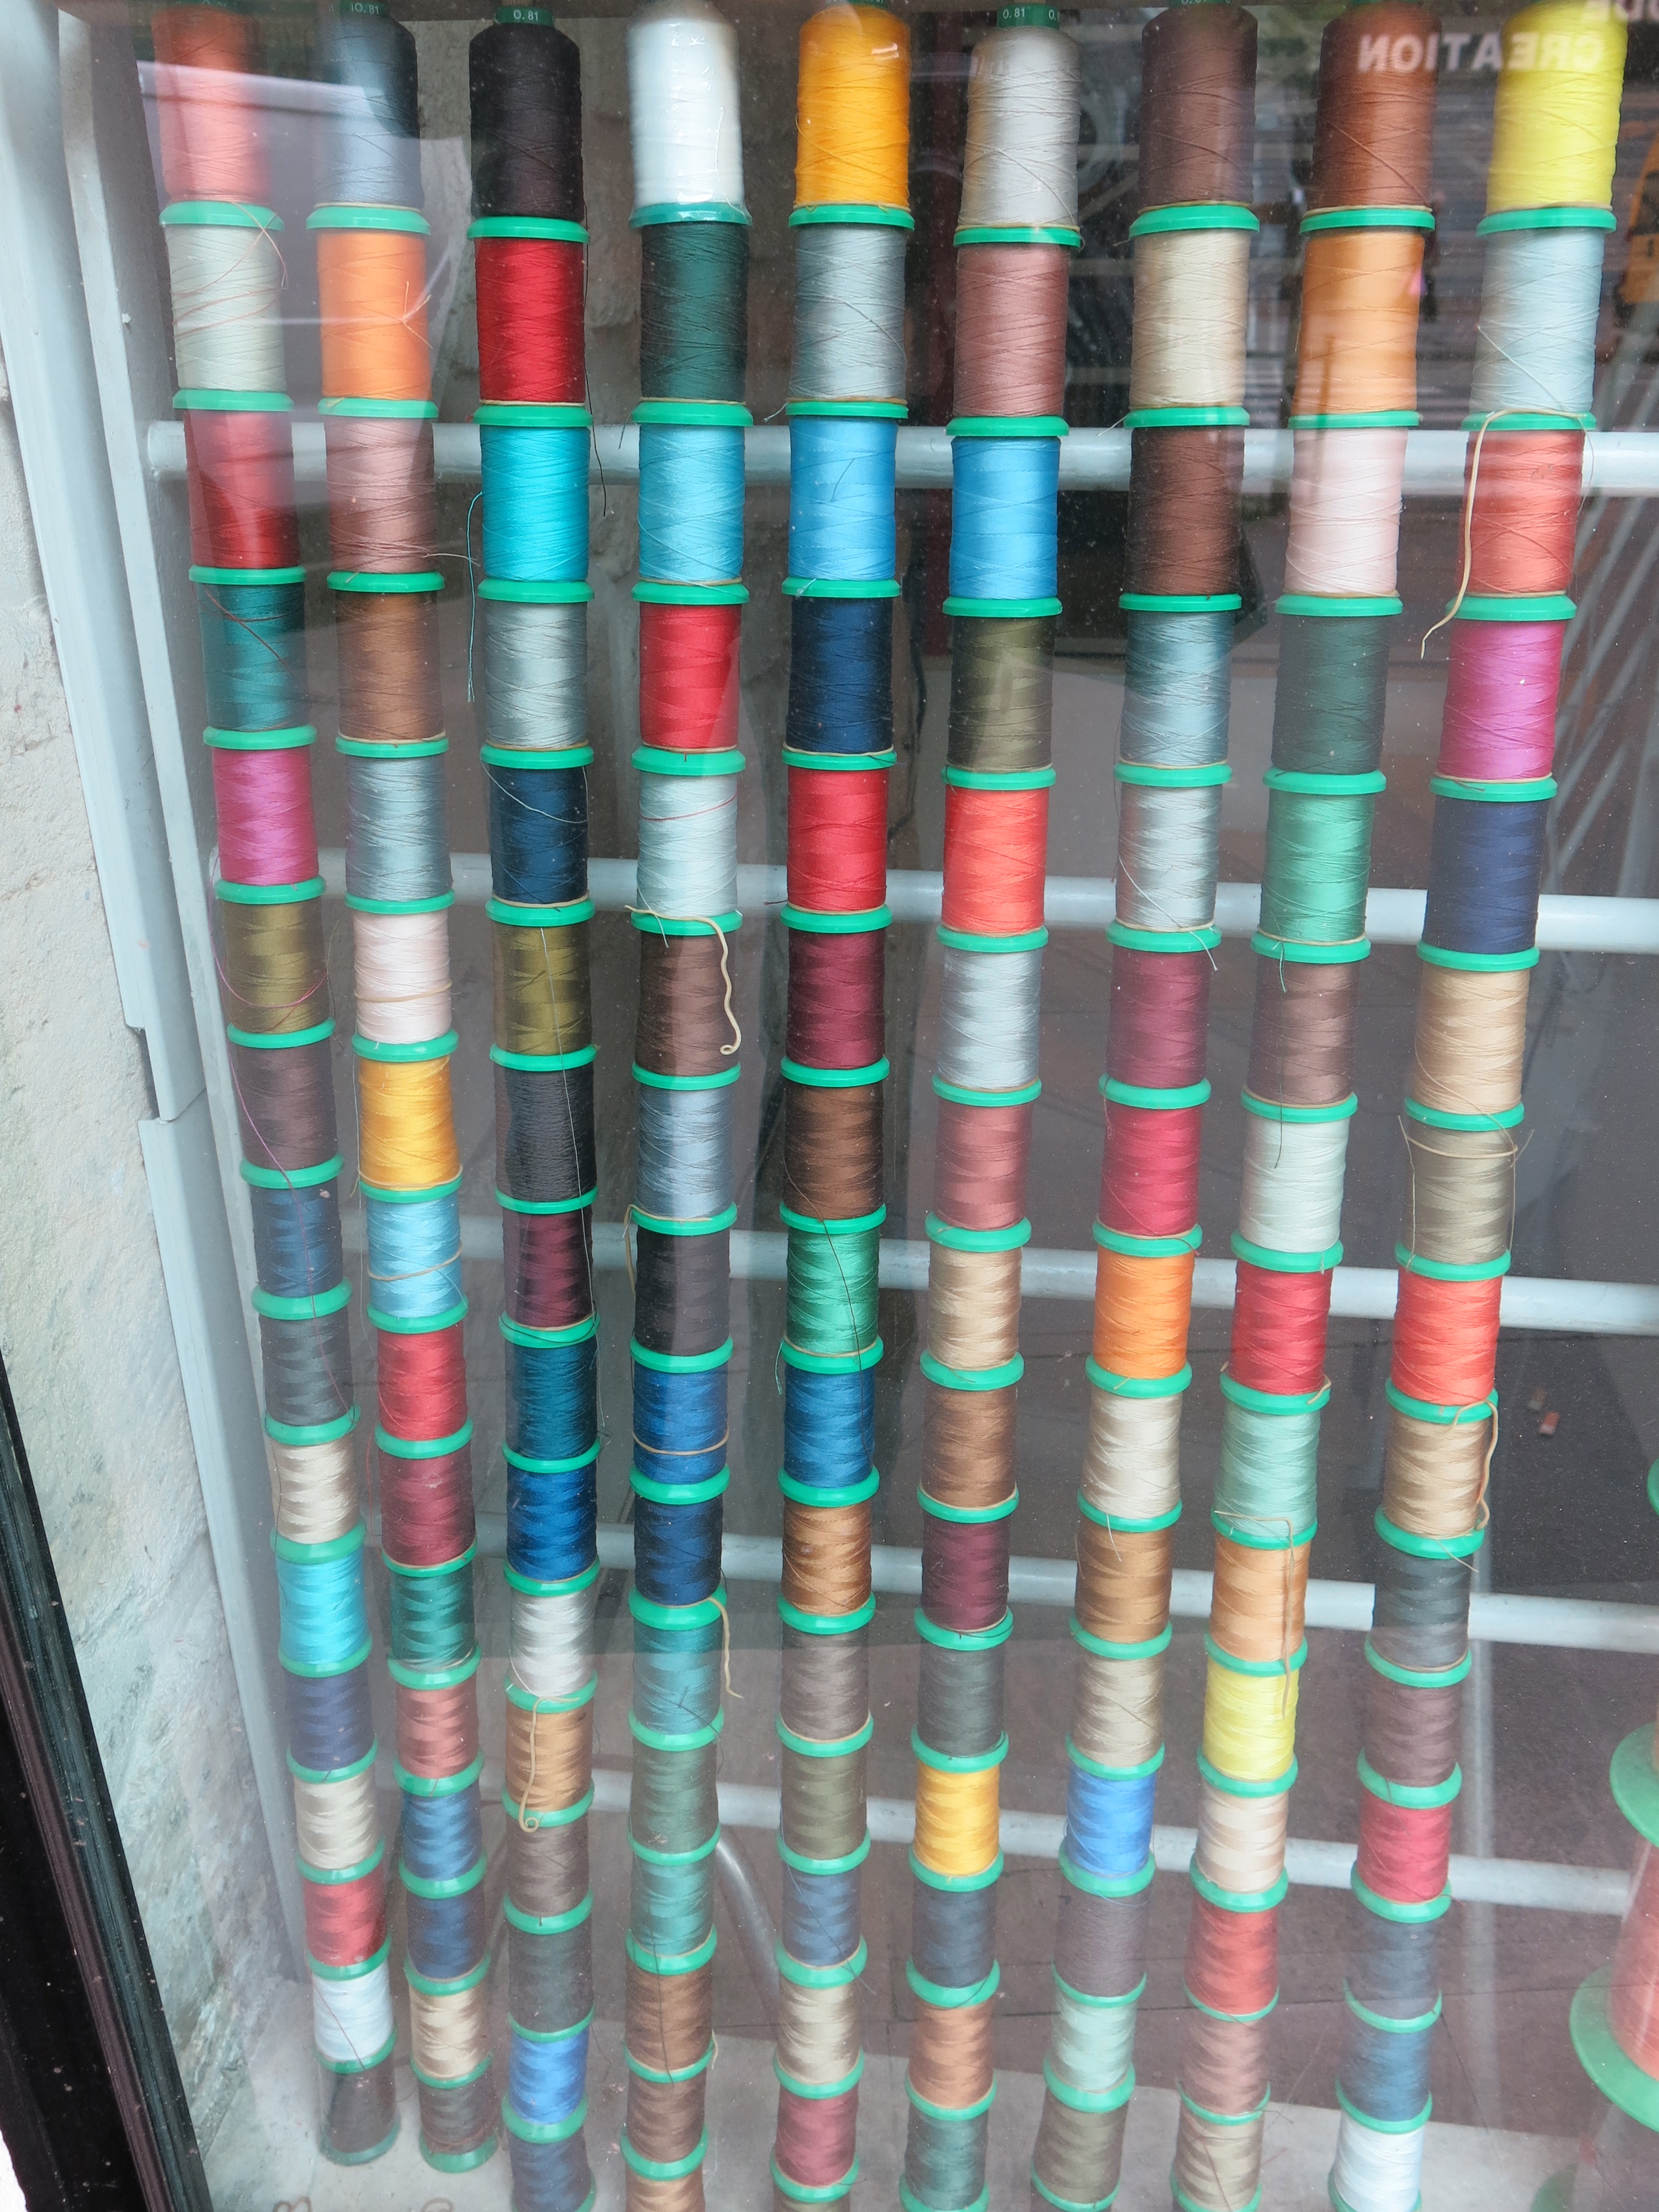 Somehow I love this collection of thread that was in the window of a tailoring shop